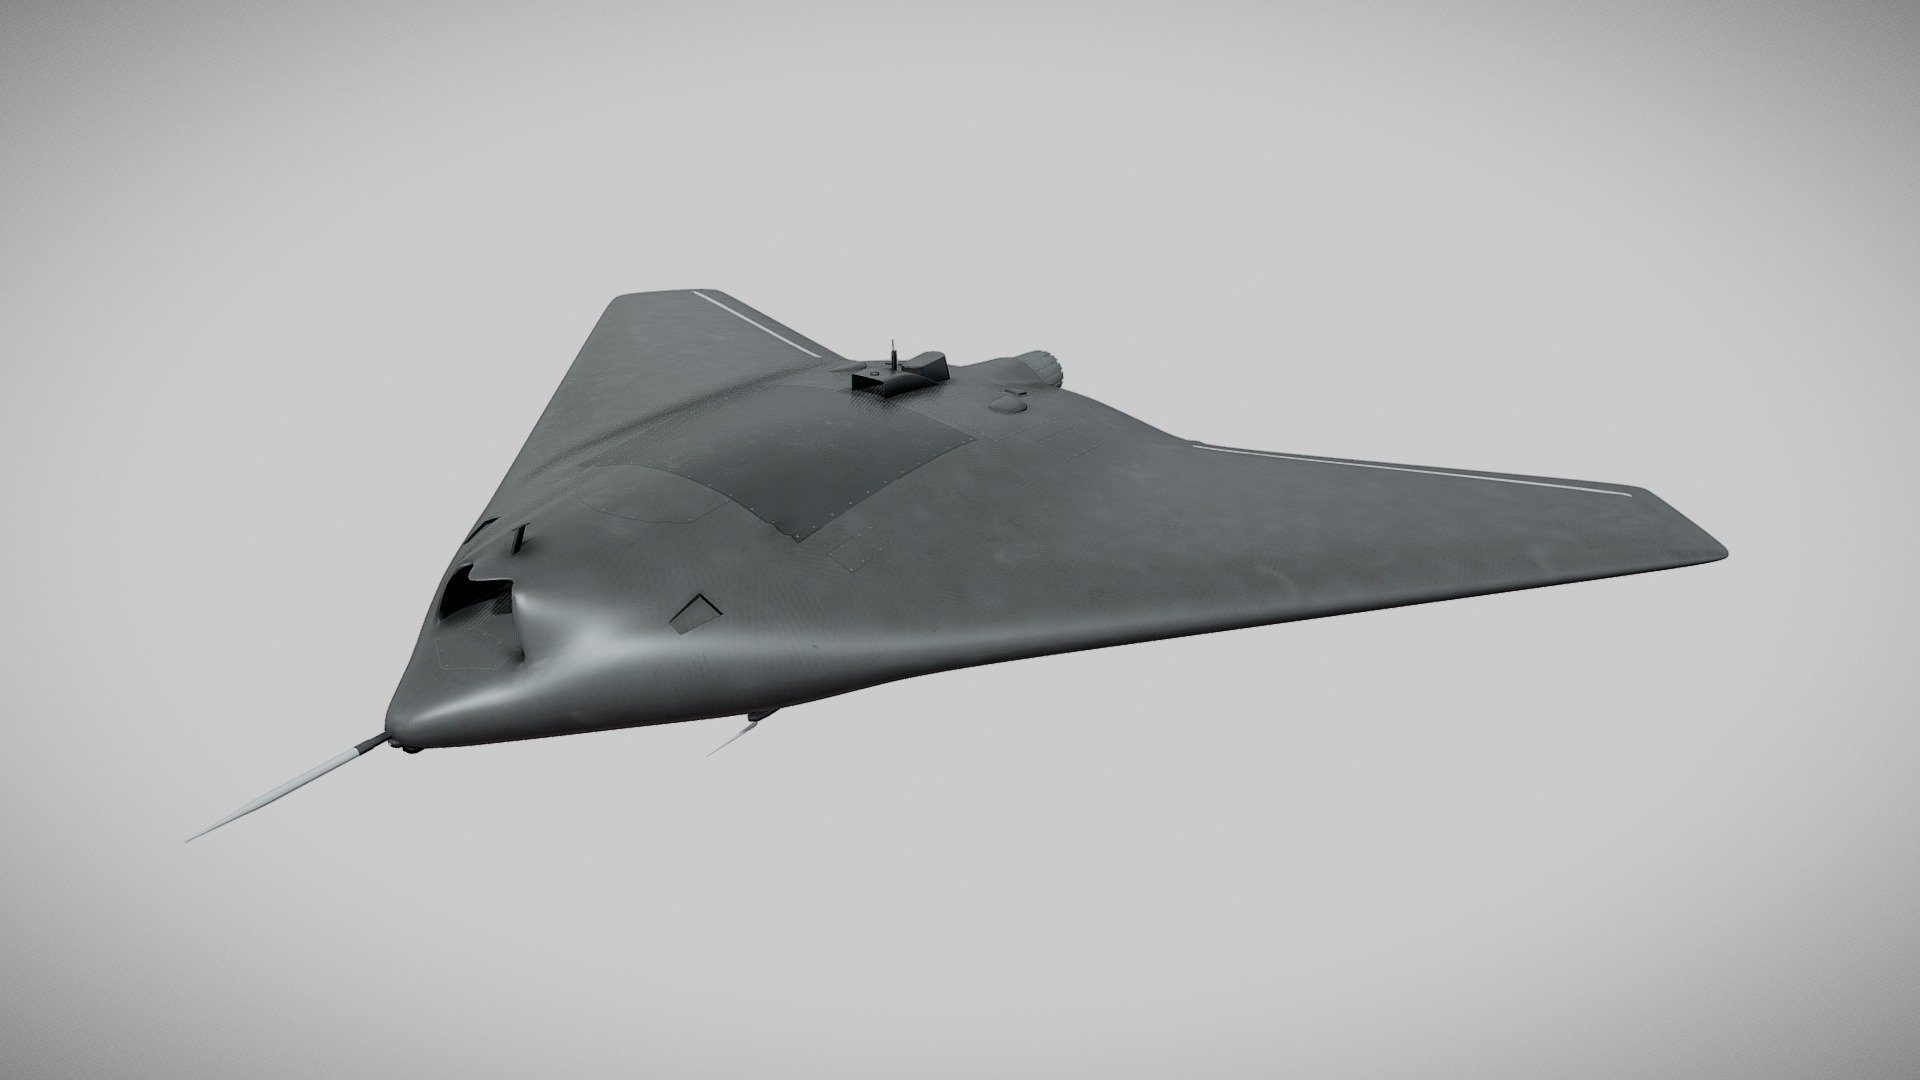 Turkish Aerospace (TA) Anka-3 is an unmanned combat aircraft project being designed and developed by the Turkish defense industry company, TA. It features a turbofan engine, houses weapon systems within the fuselage, has a high payload capacity, incorporates stealth technology, and does not have a tail. (wikipedia)

I made this model by using Blender and Substance Painter. I’ll continue to improve the model.

For more: https://cemgurbuz.com/anka-3 - ANKA 3 - 3D model by Cem Gürbüz (@cemgurbuz) 3d model